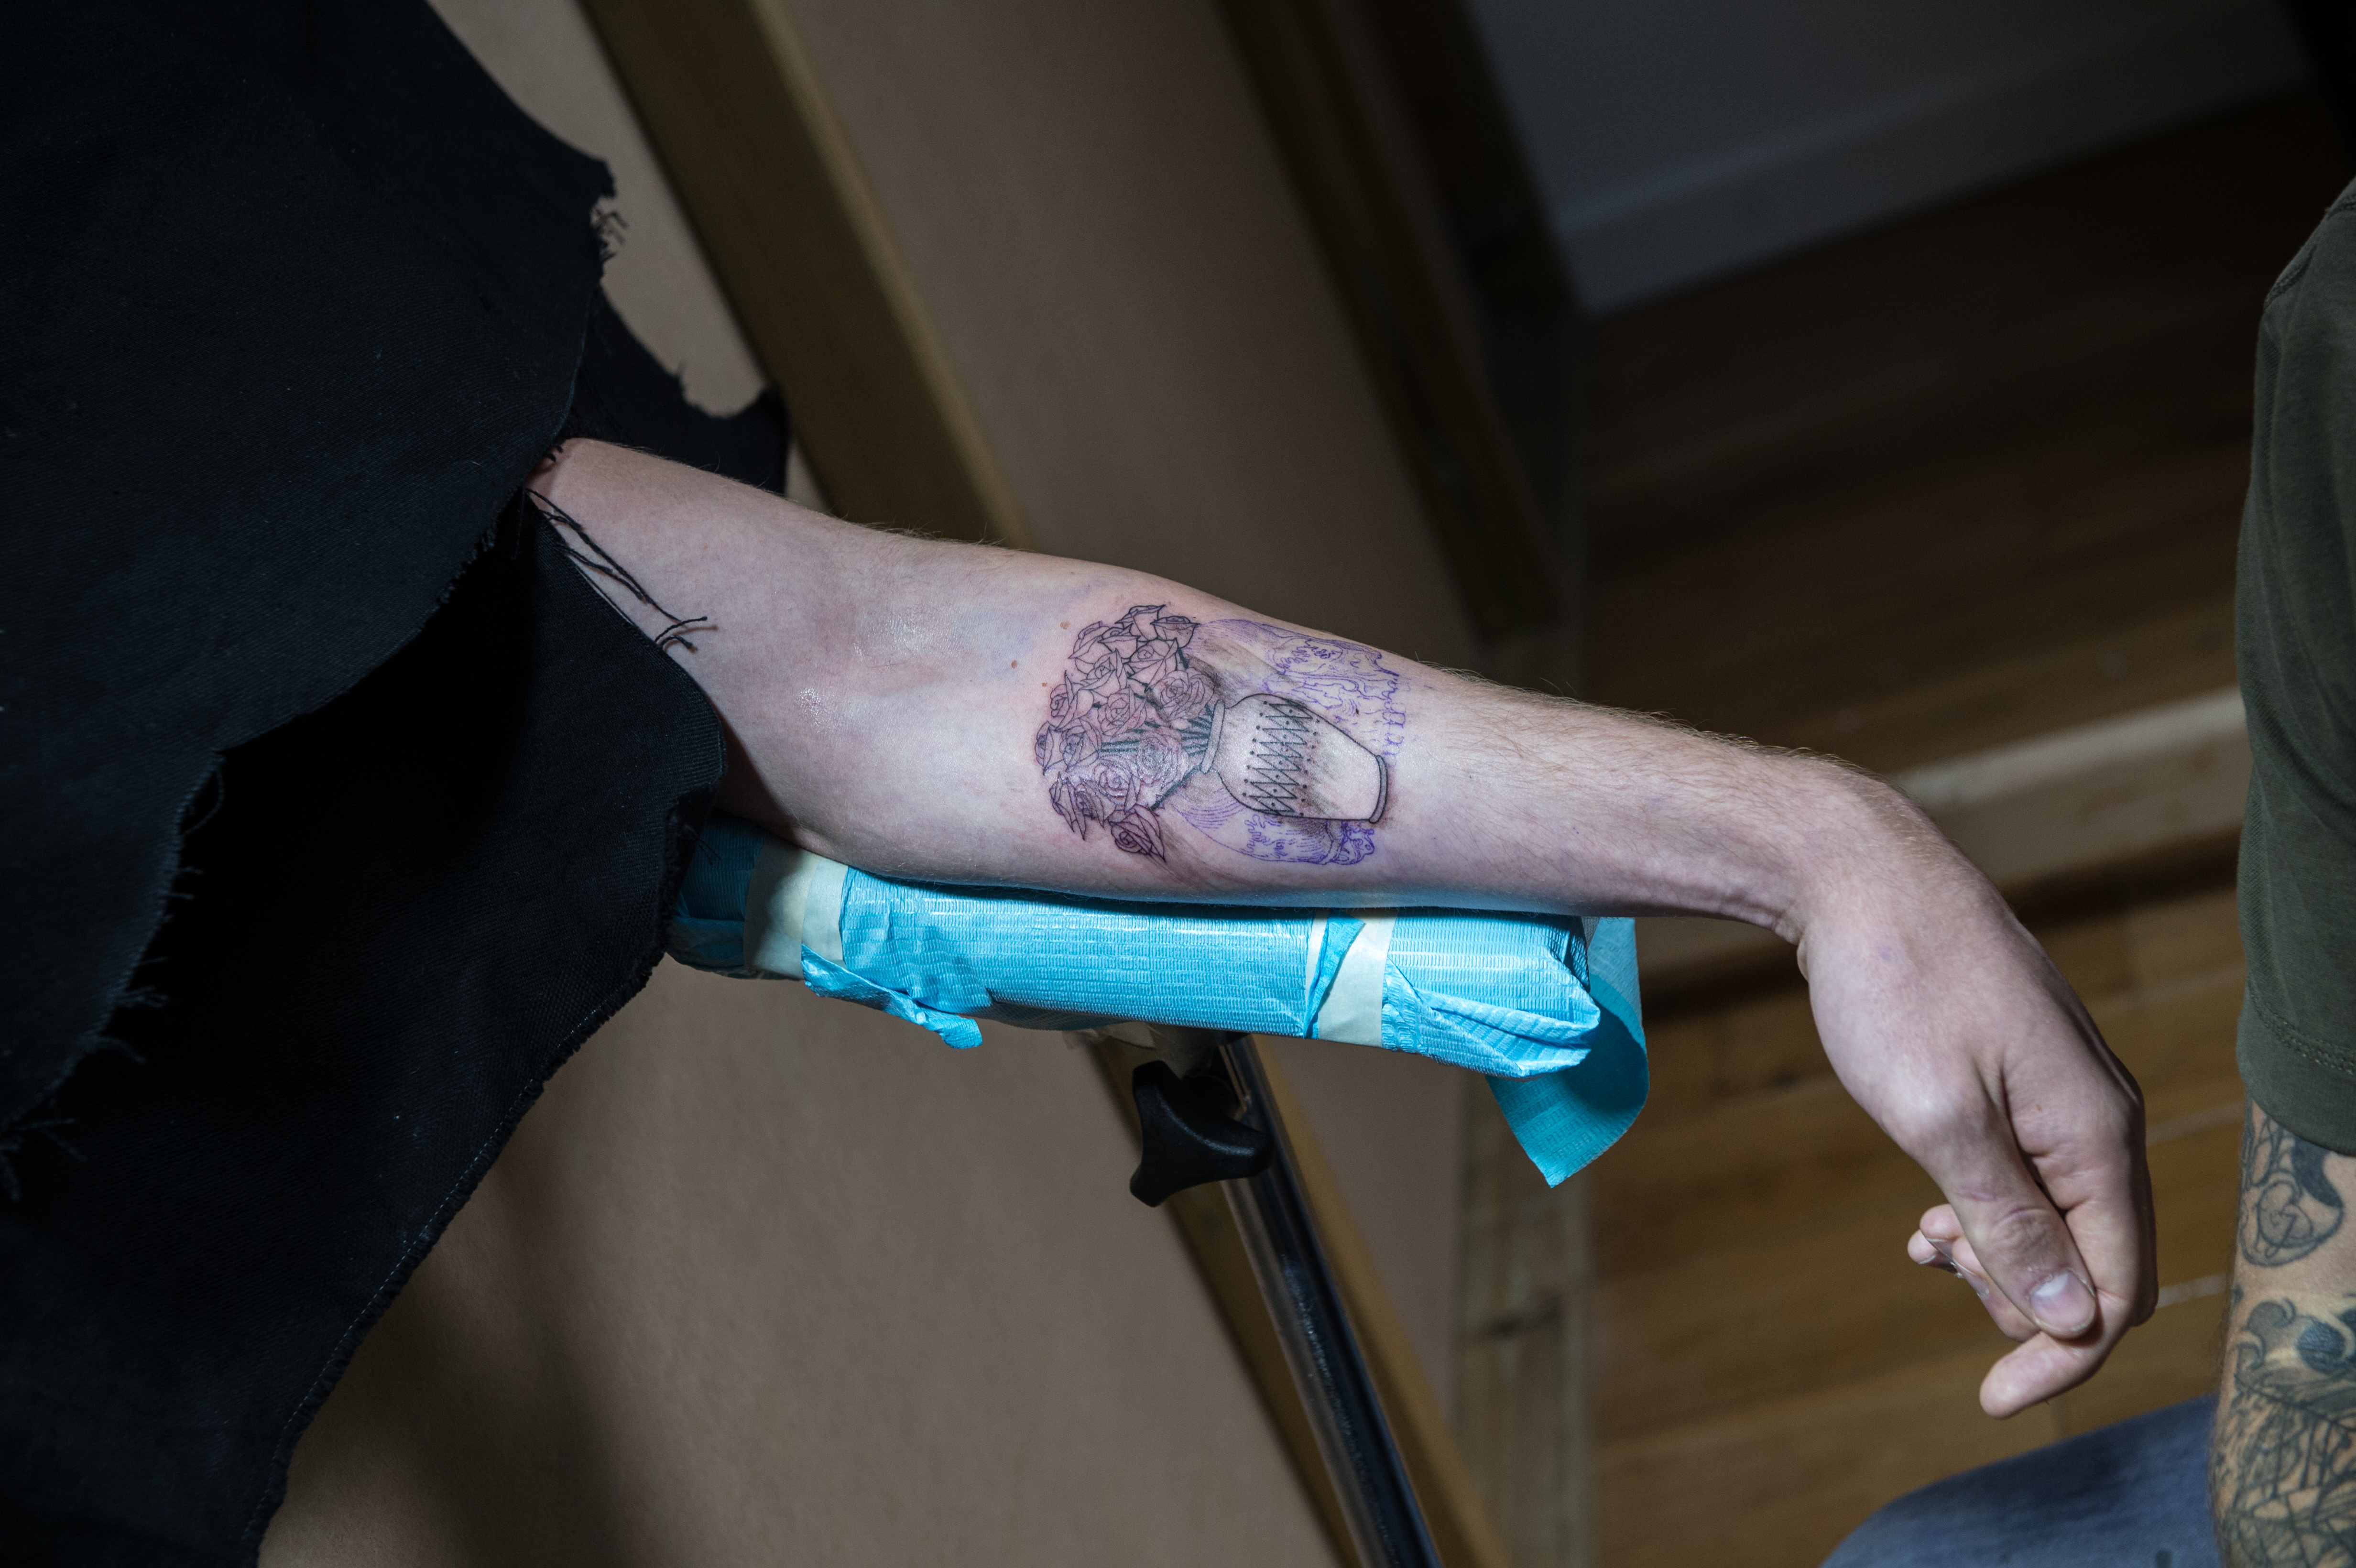 Tattoo Infections and Bloodborne Pathogens: Essential Info